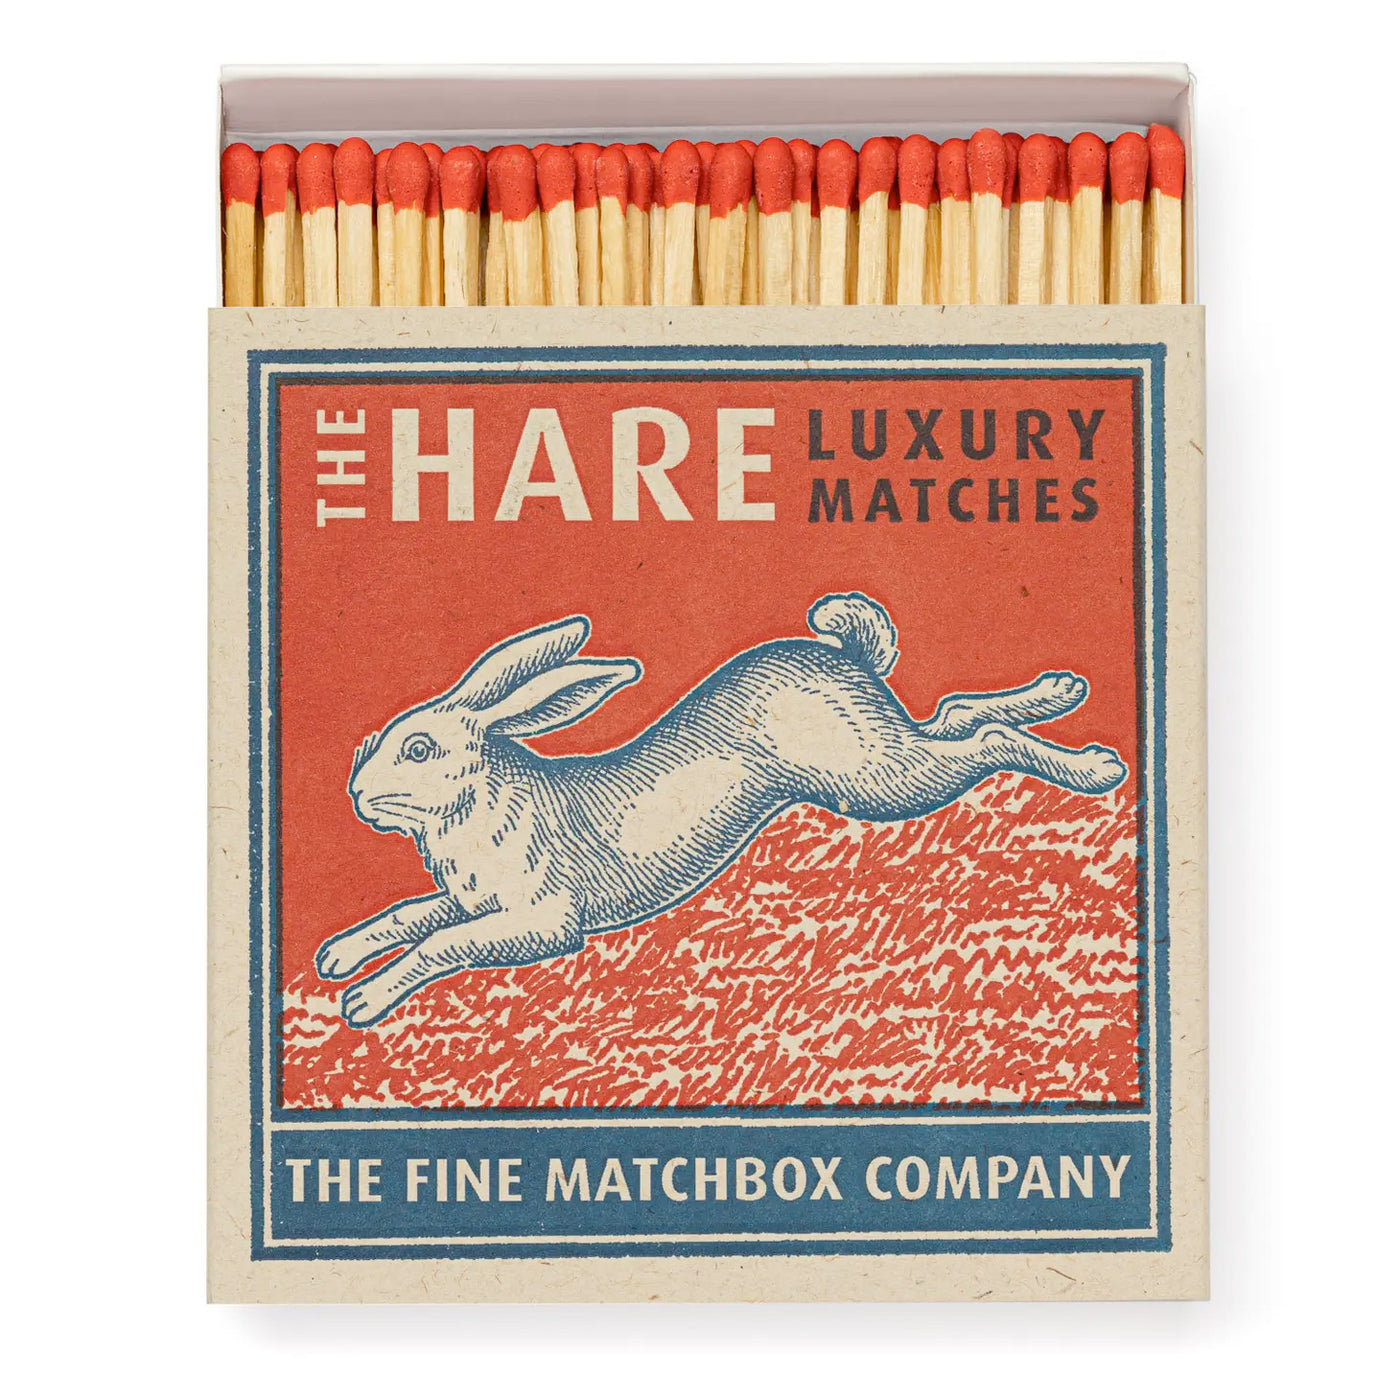 The Hare Matches